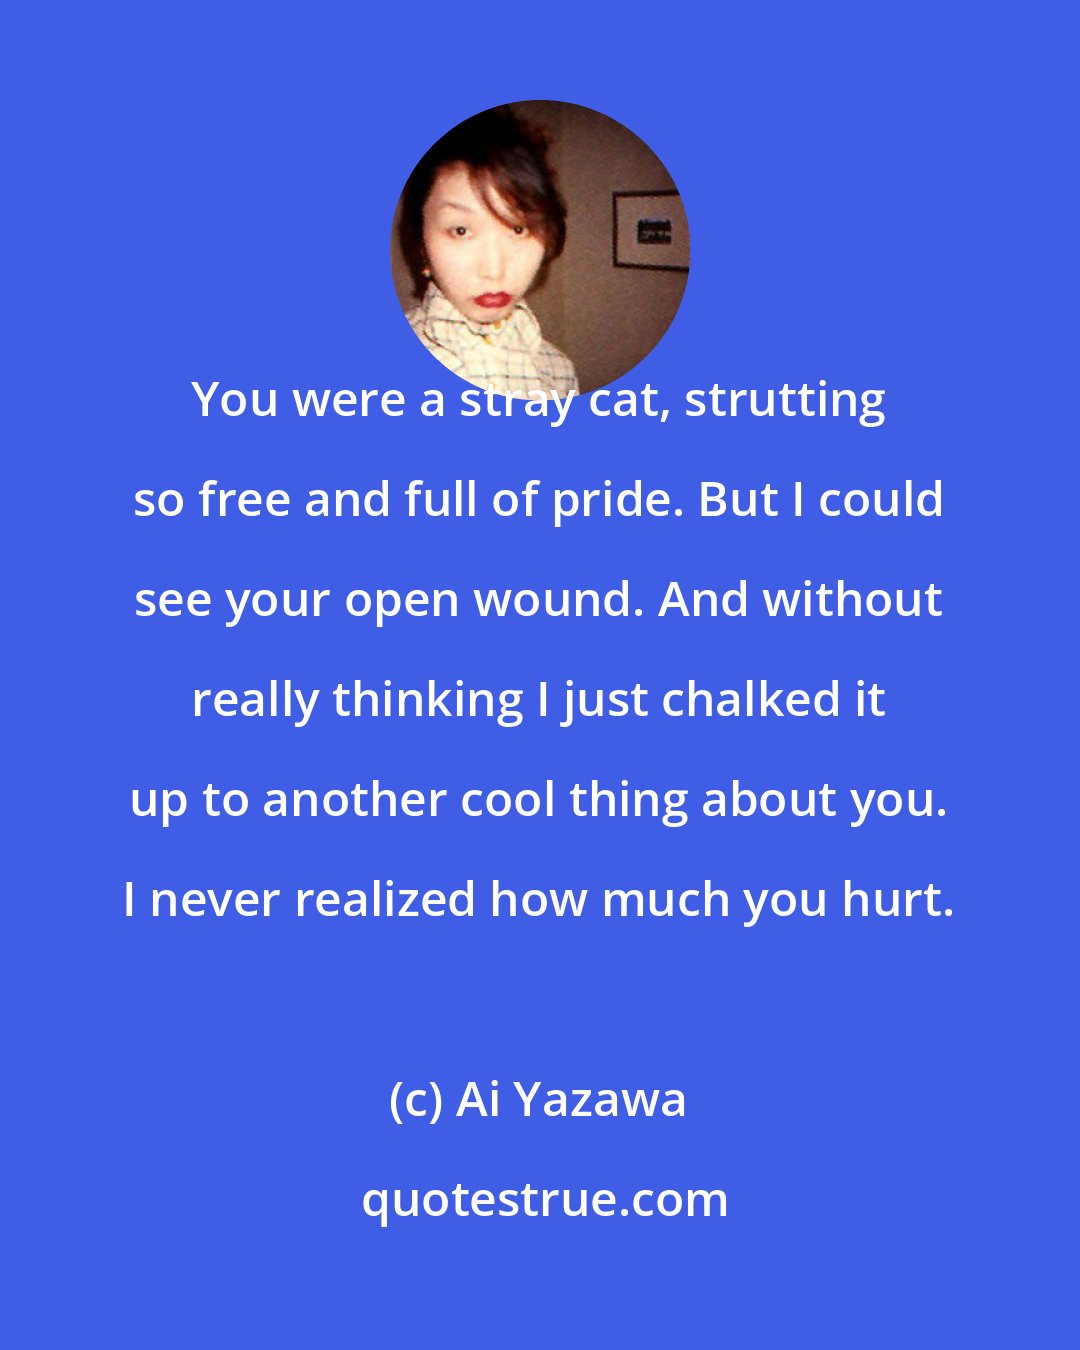 Ai Yazawa: You were a stray cat, strutting so free and full of pride. But I could see your open wound. And without really thinking I just chalked it up to another cool thing about you. I never realized how much you hurt.